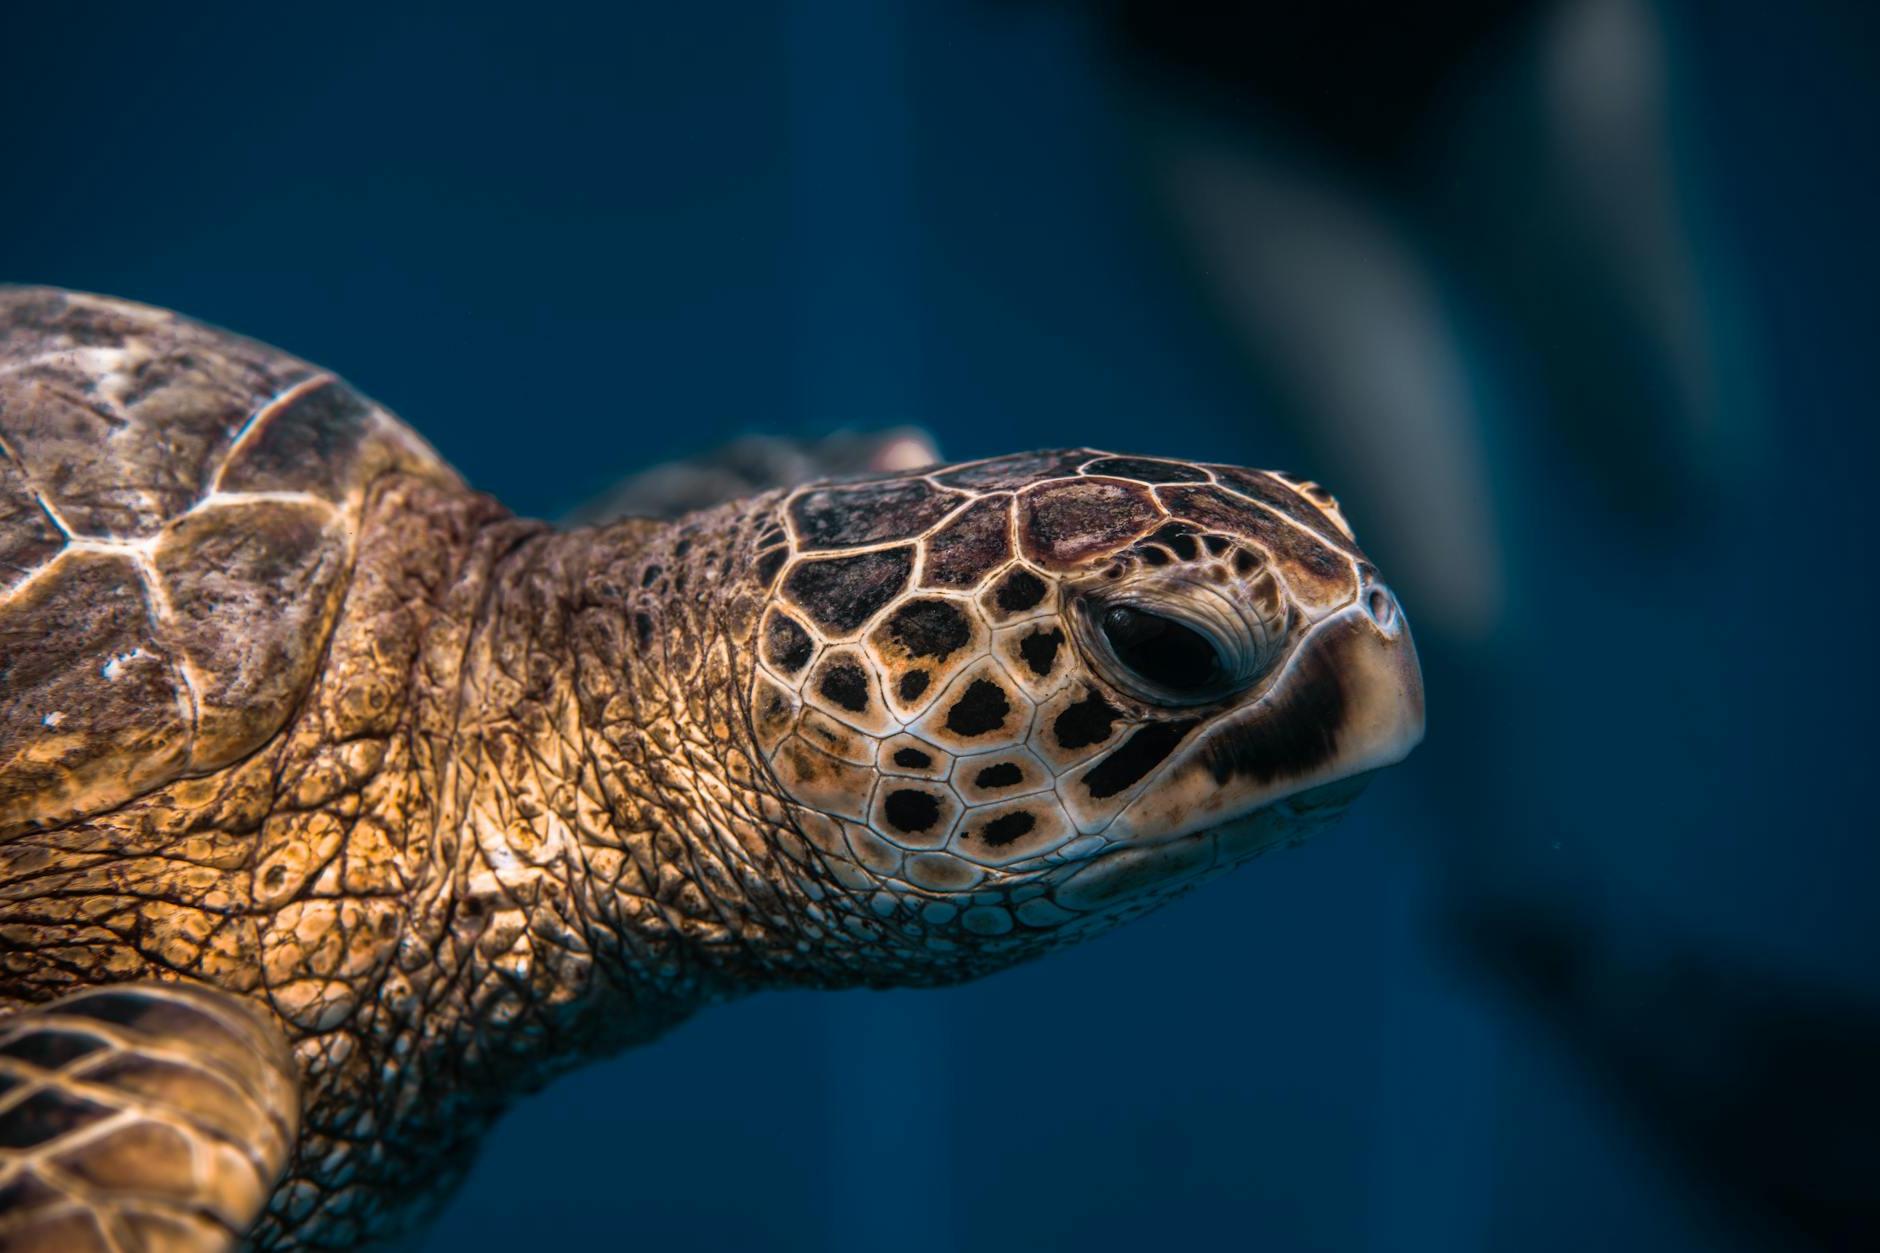 A close up of a green sea turtle swimming in the water